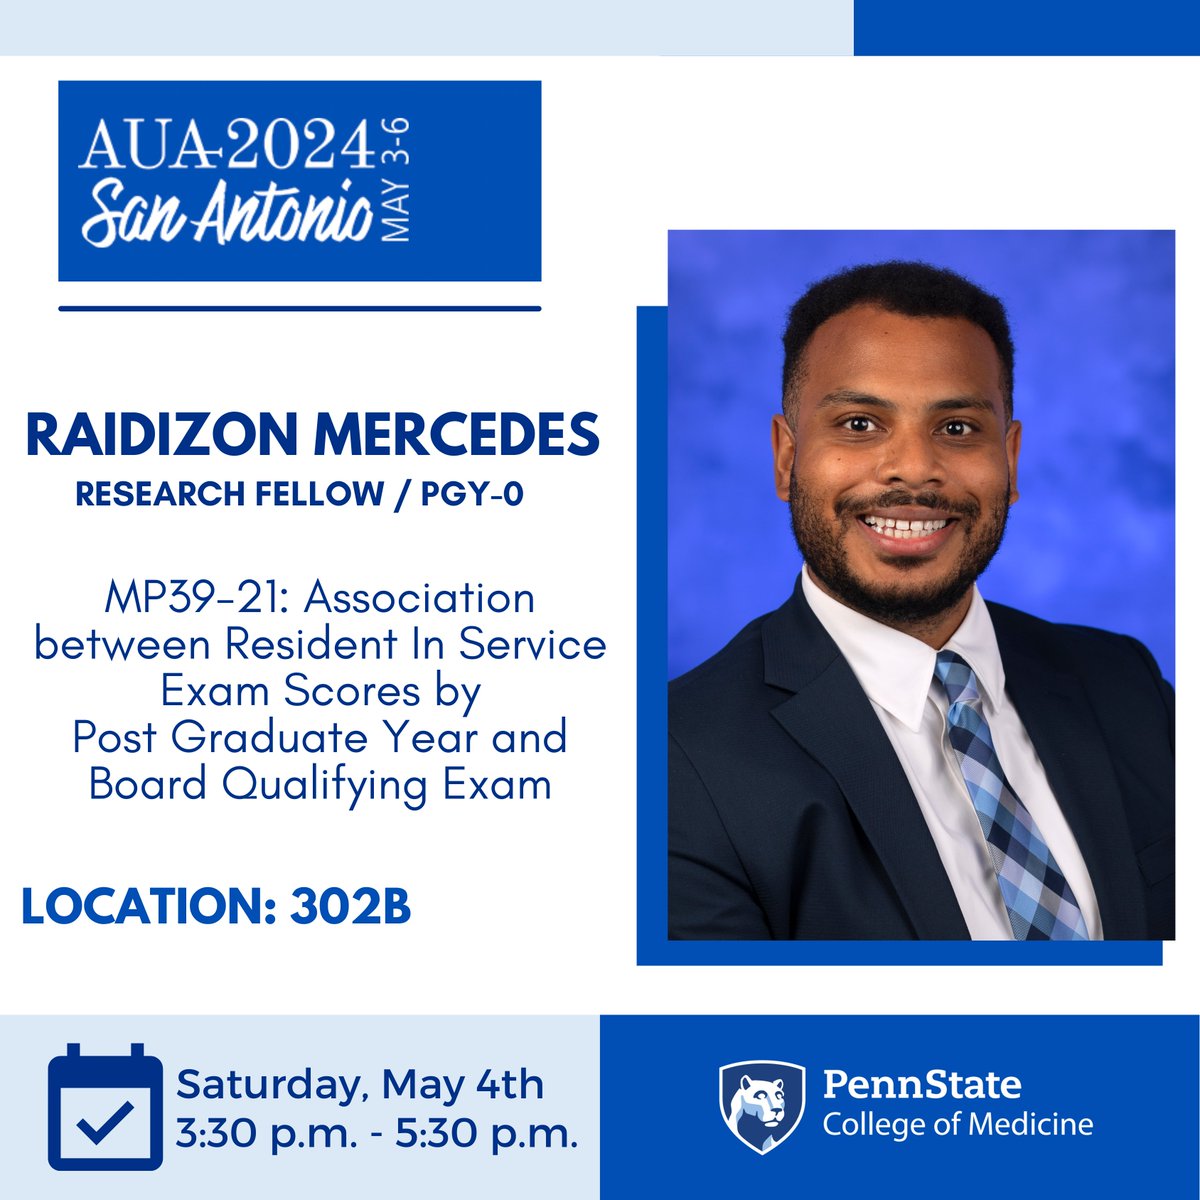 Incoming PGY-0 and current Research Fellow, @rhmercedes, is presenting his final poster during the 3:30 pm - 5 pm session! Make sure to check out his amazing research! #AUA24 #AUA2024 #UroSoMe #Urology #Research #SanAntonio